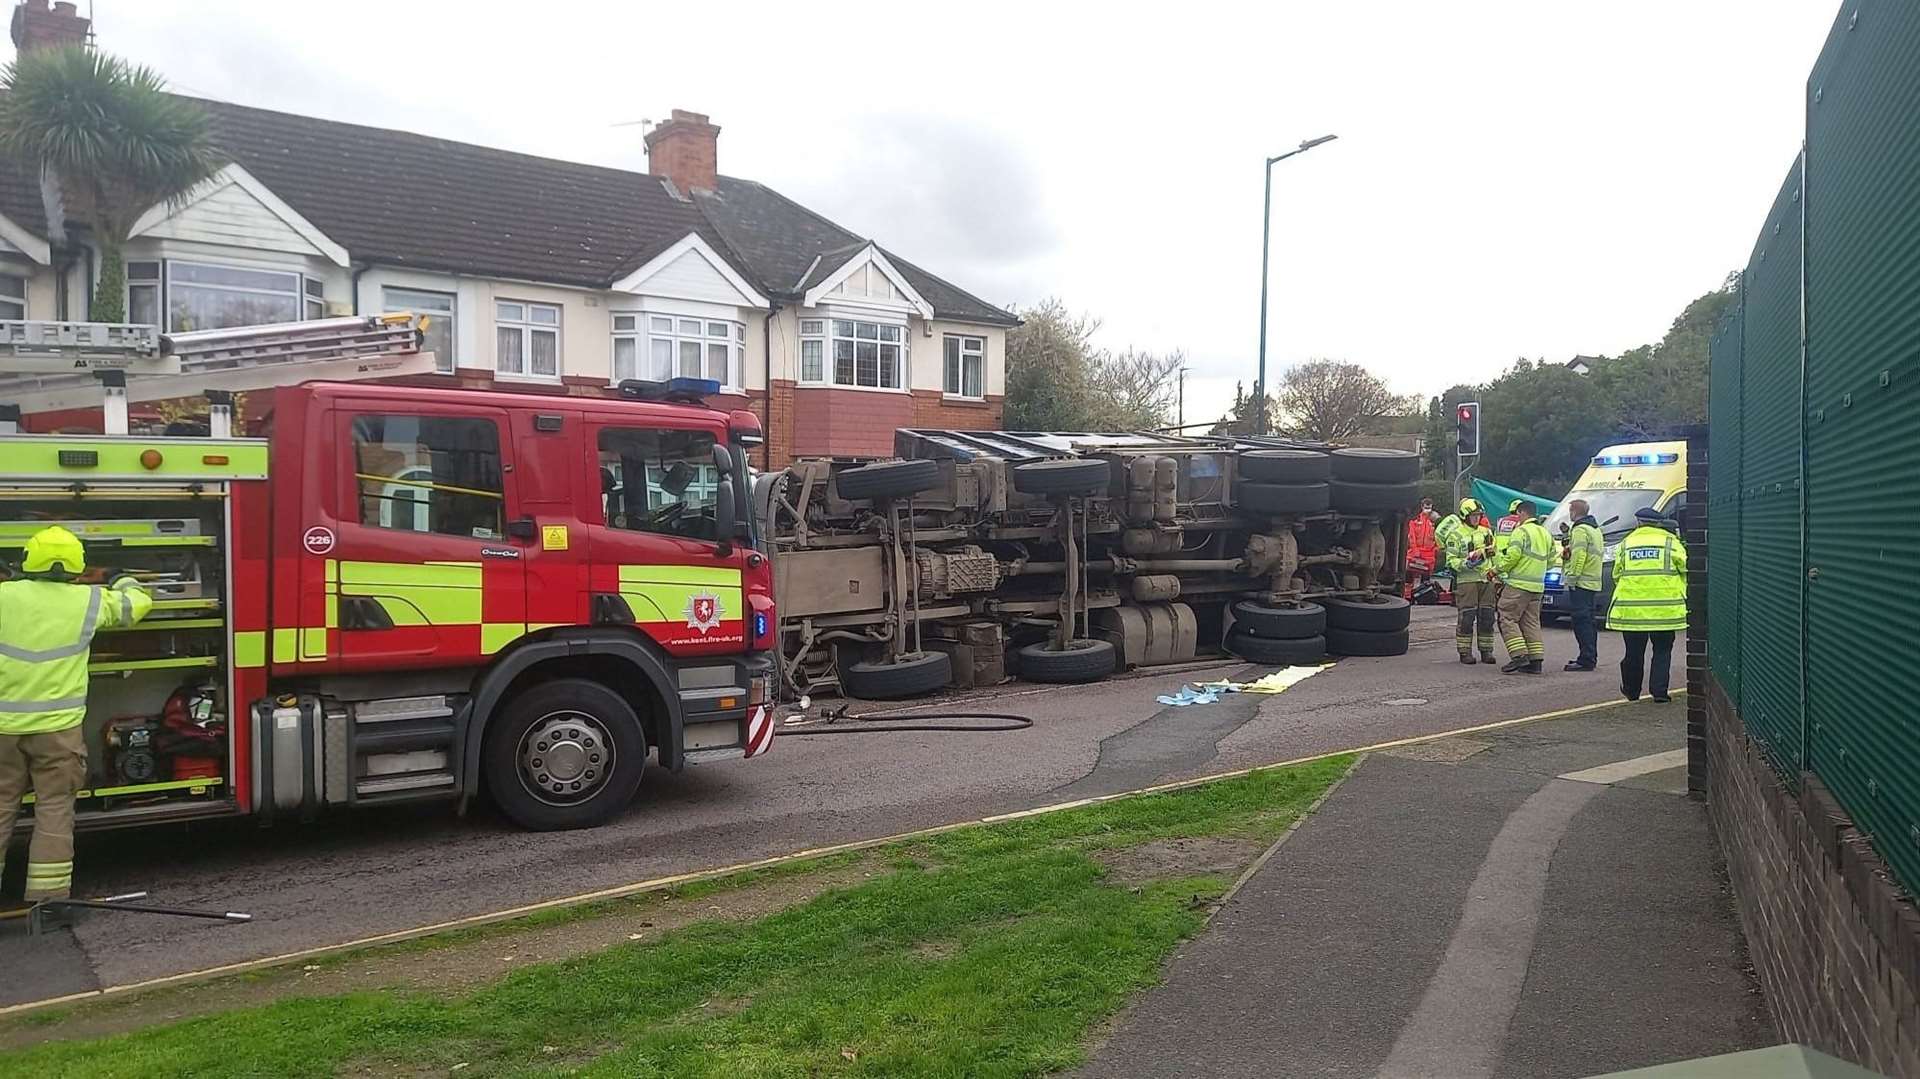 The lorry has overturned on Station Road. Picture: Kieren Stannard